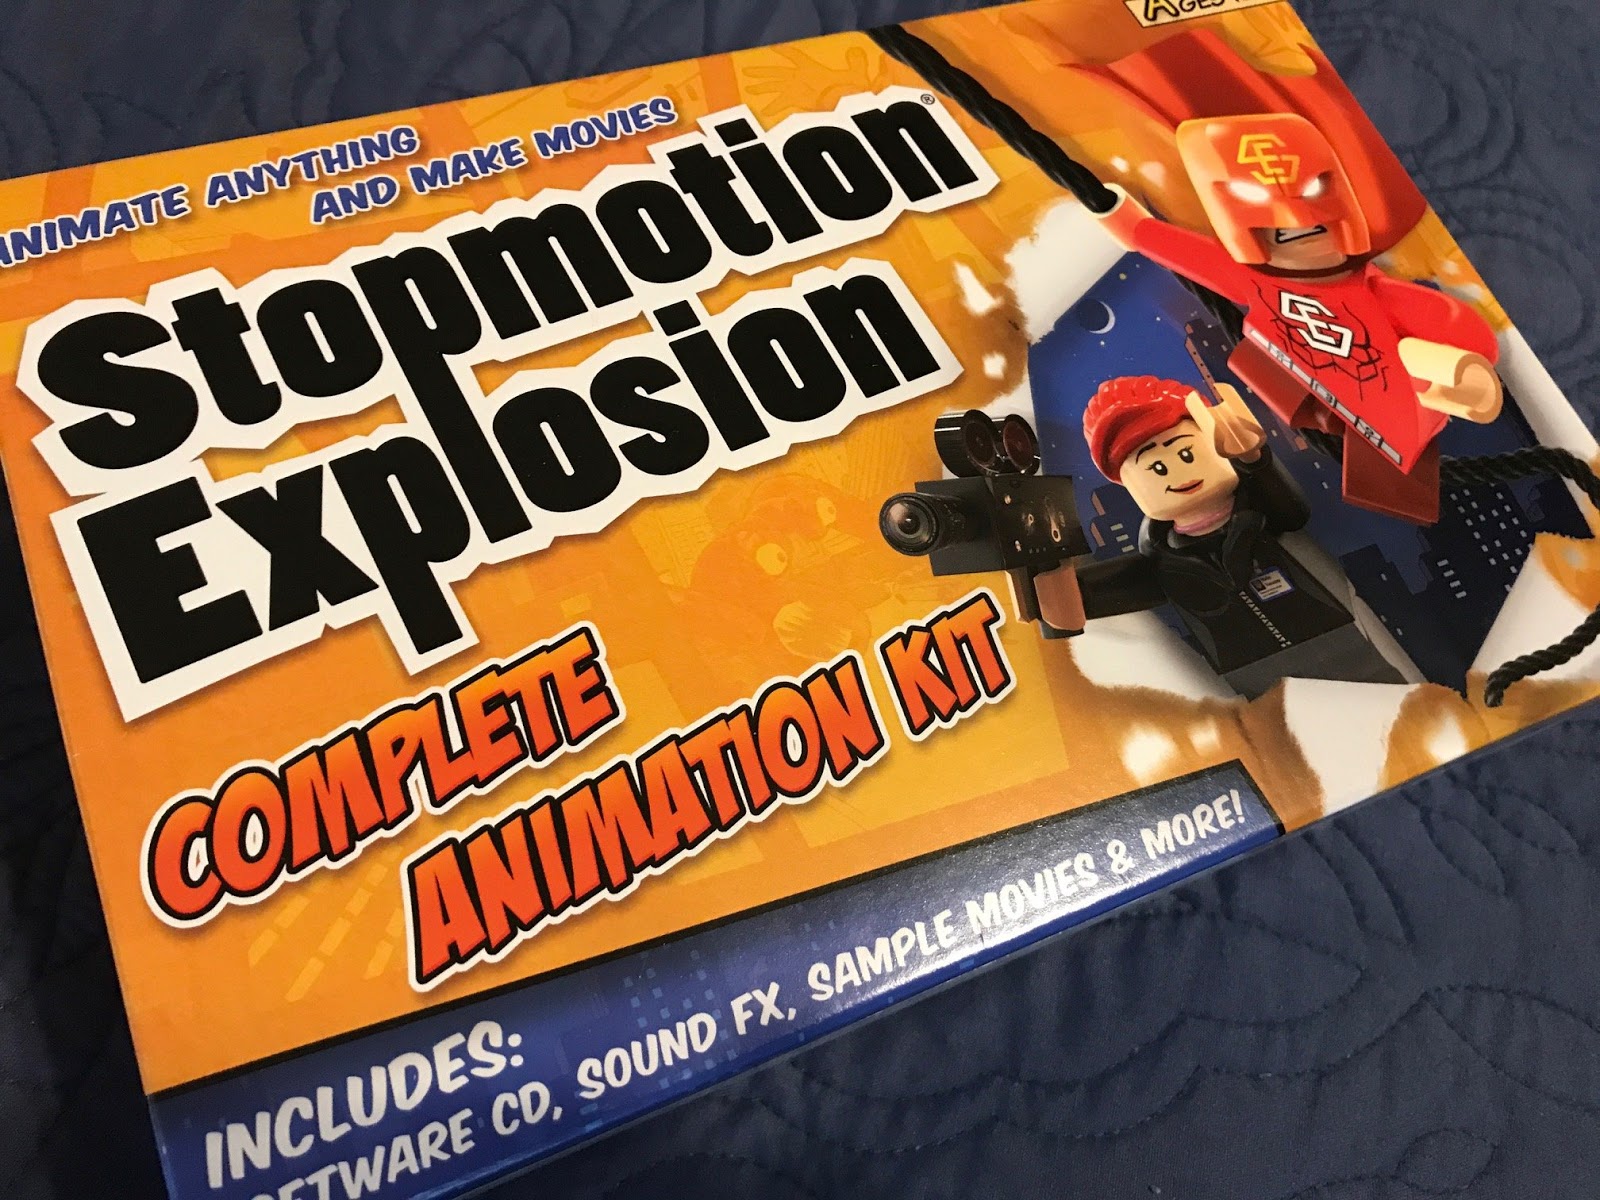 My Review of the Stop Motion Animation Kit from Stopmotion Explosion